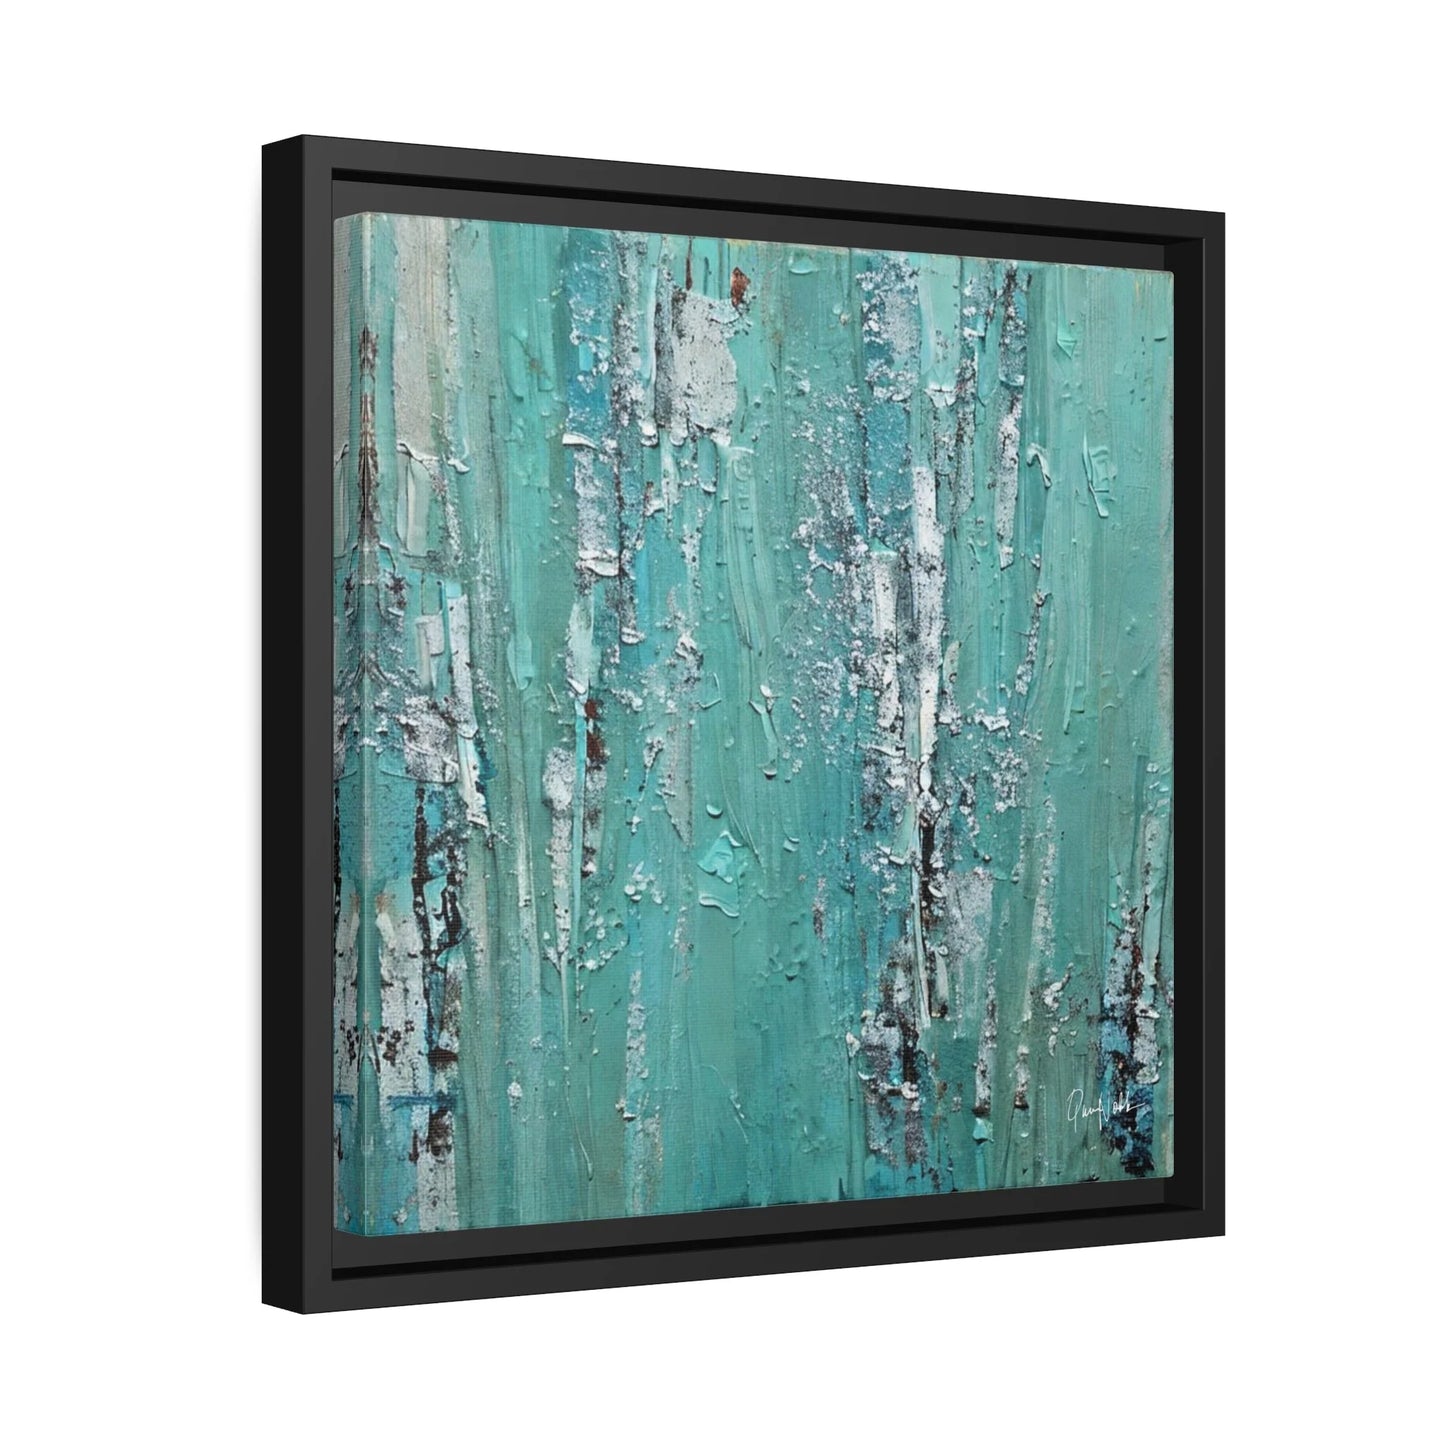 "Premium Canvas Wall Art with Frame and Eco-Friendly H20 - by Queennoble"